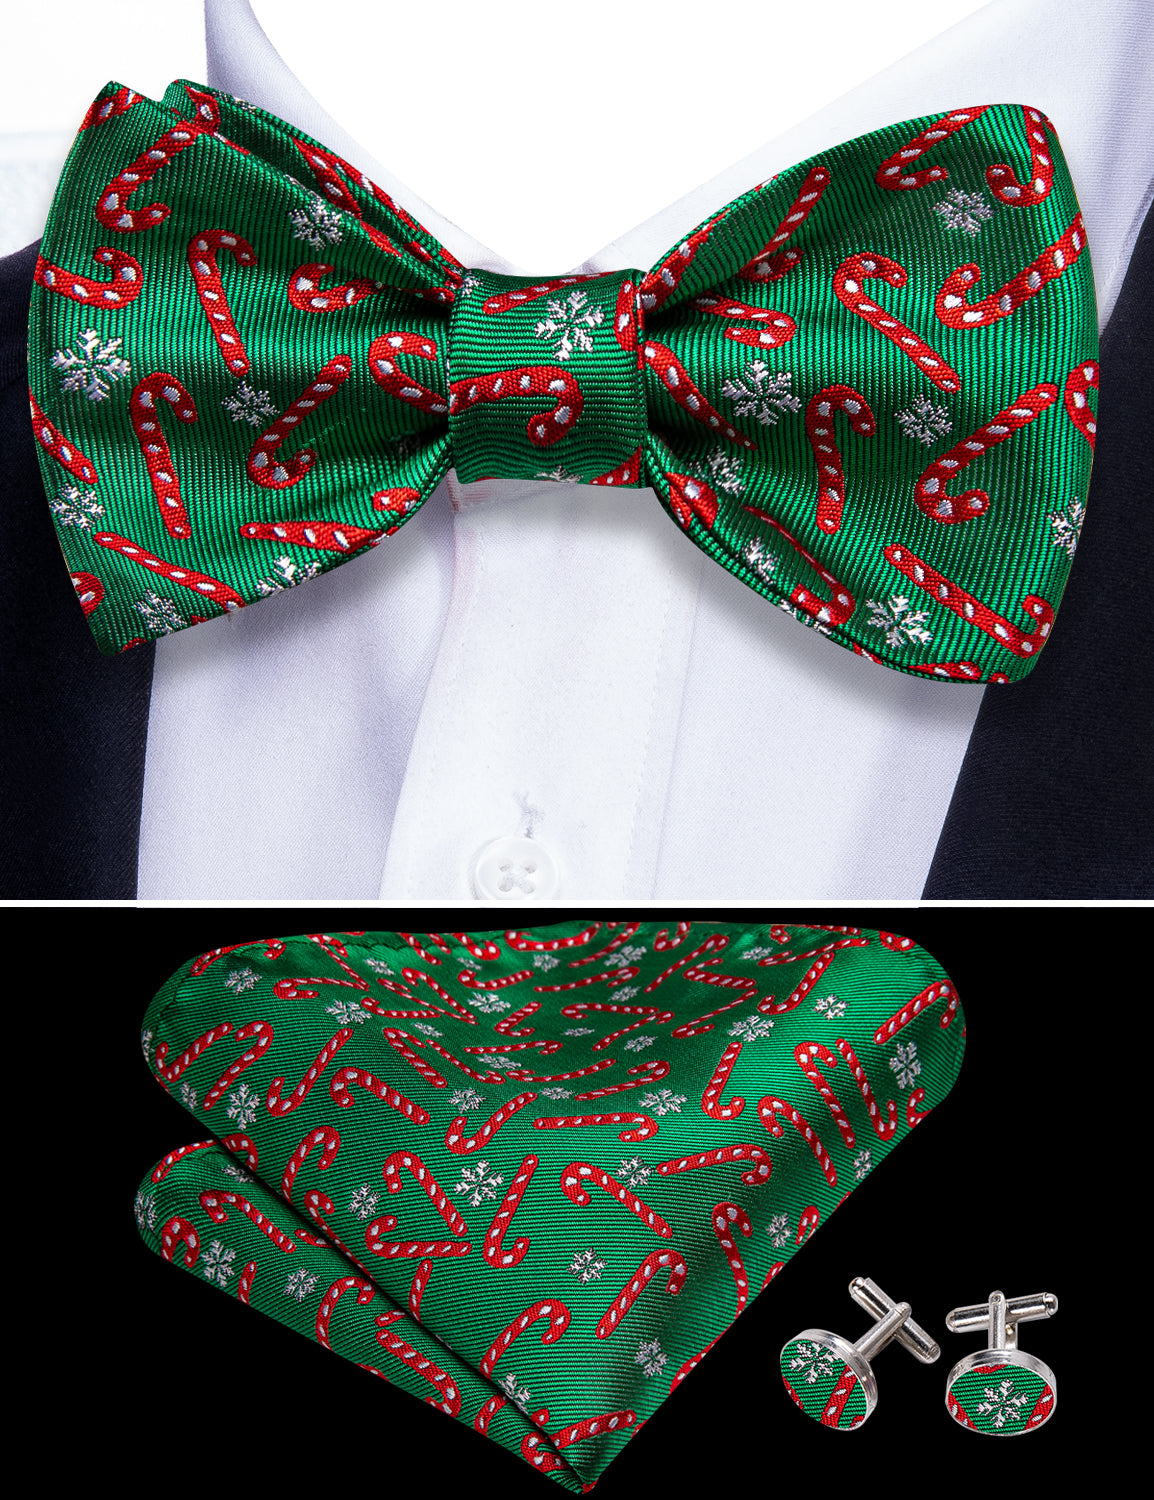 Barry Wang Christmas Green Bow Tie with Candy Cane Pattern Hanky Cufflinks Set